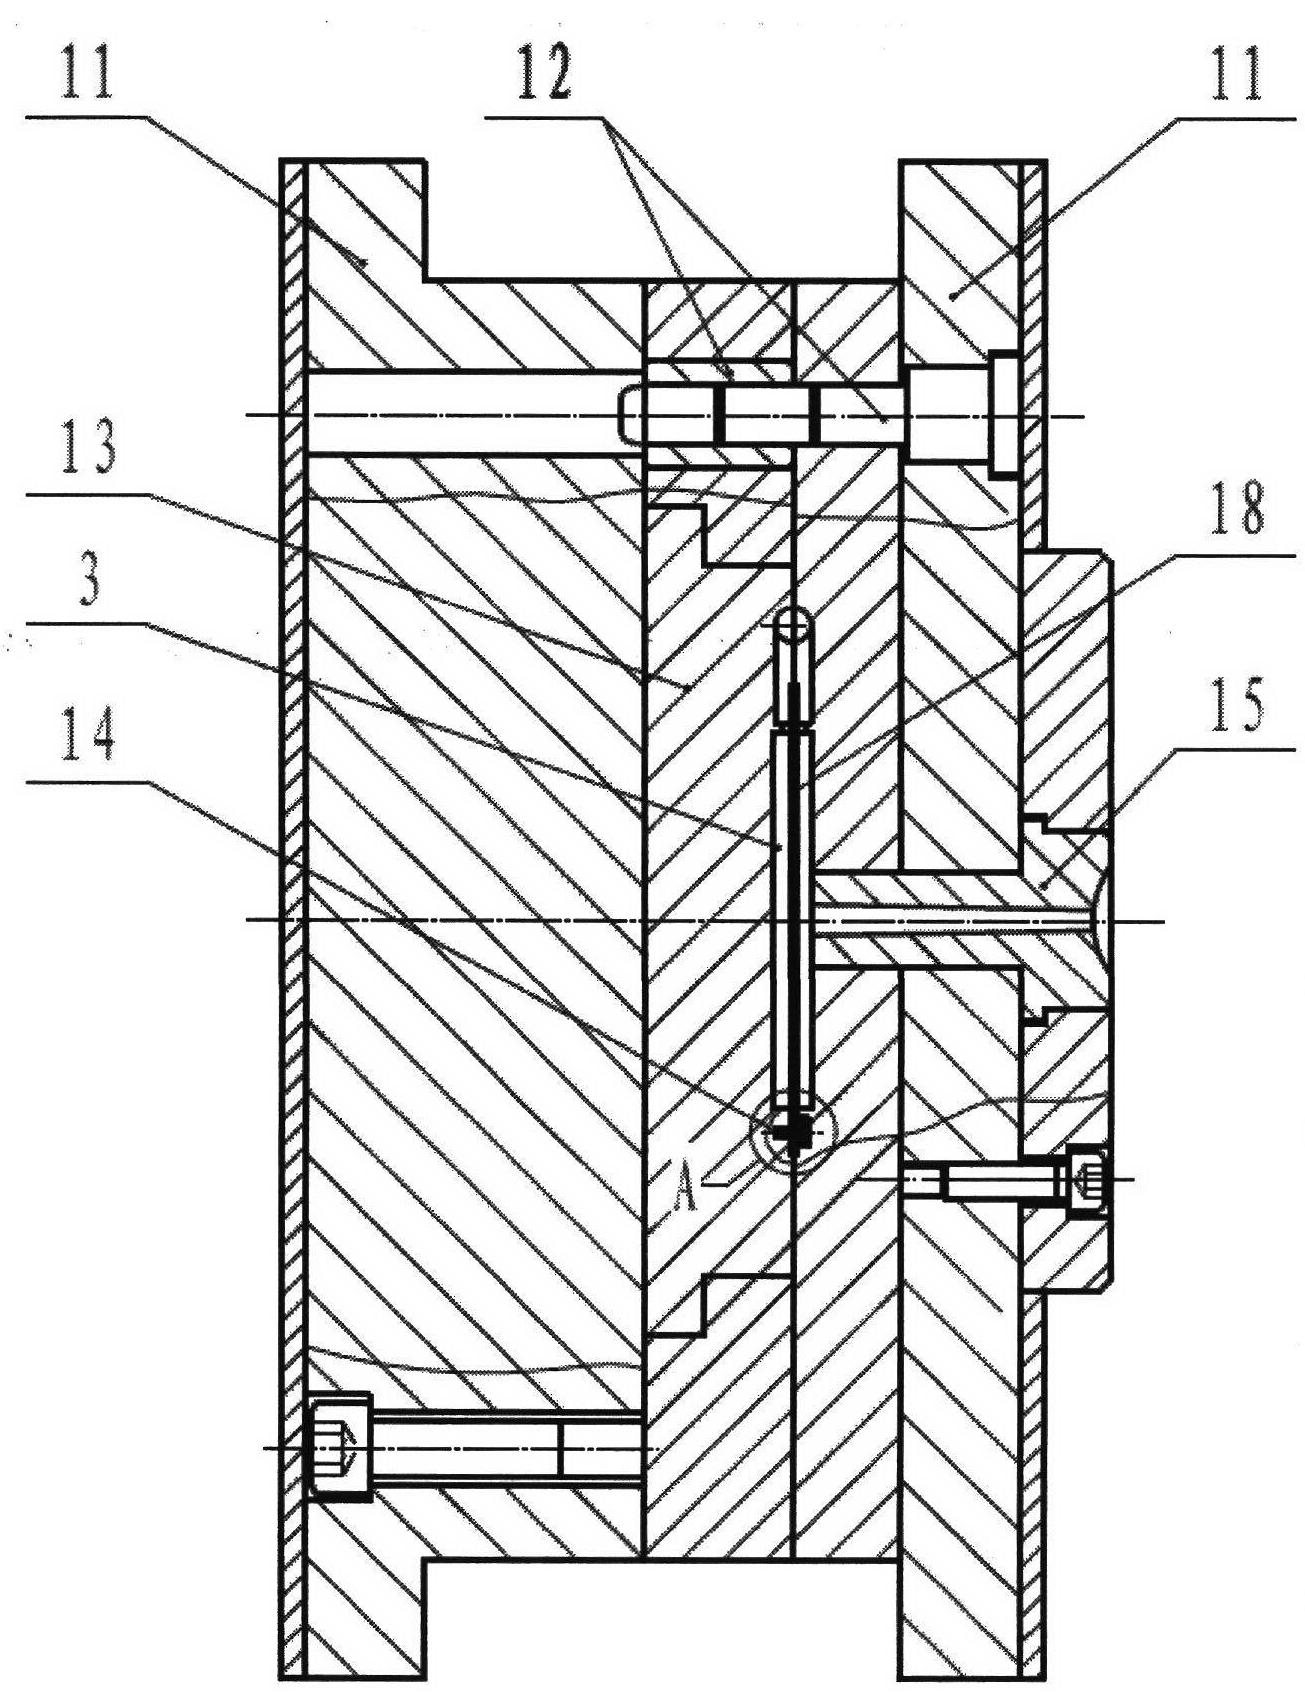 Injection molding method and equipment for single polymer composite product